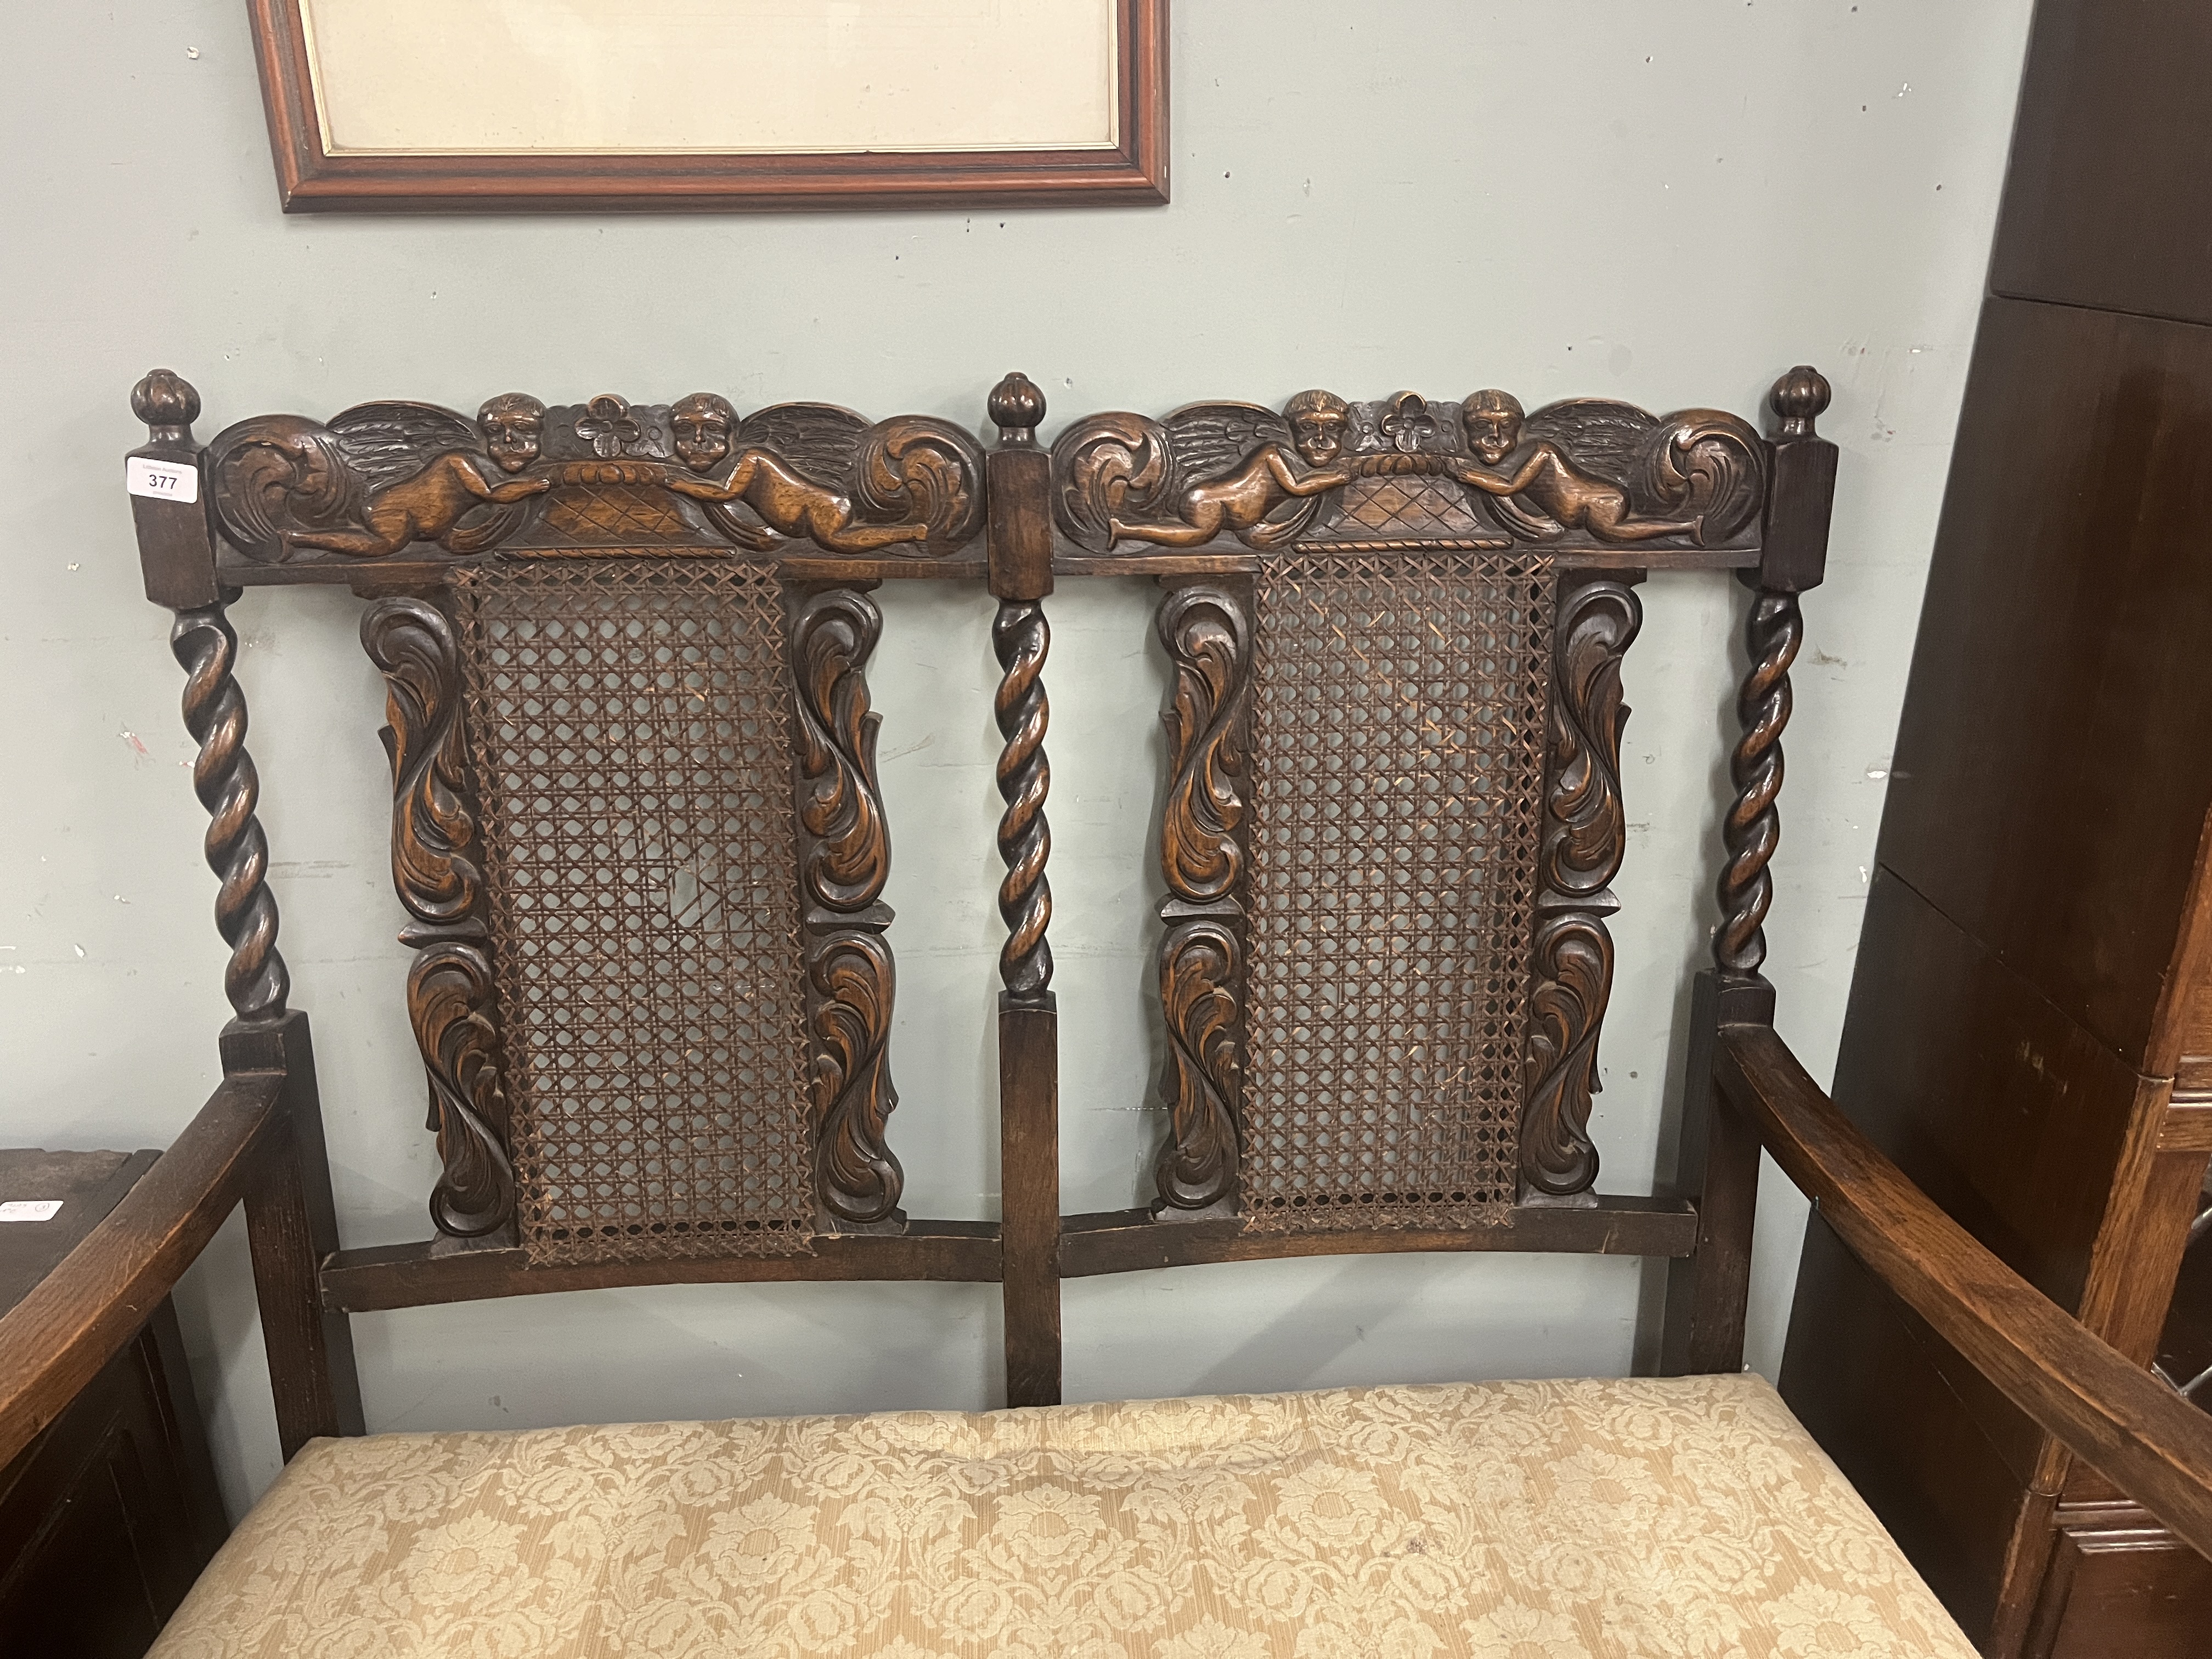 Late 19th to early 20th century Jacobean style carved rail hall bench with bergère back - Image 2 of 4